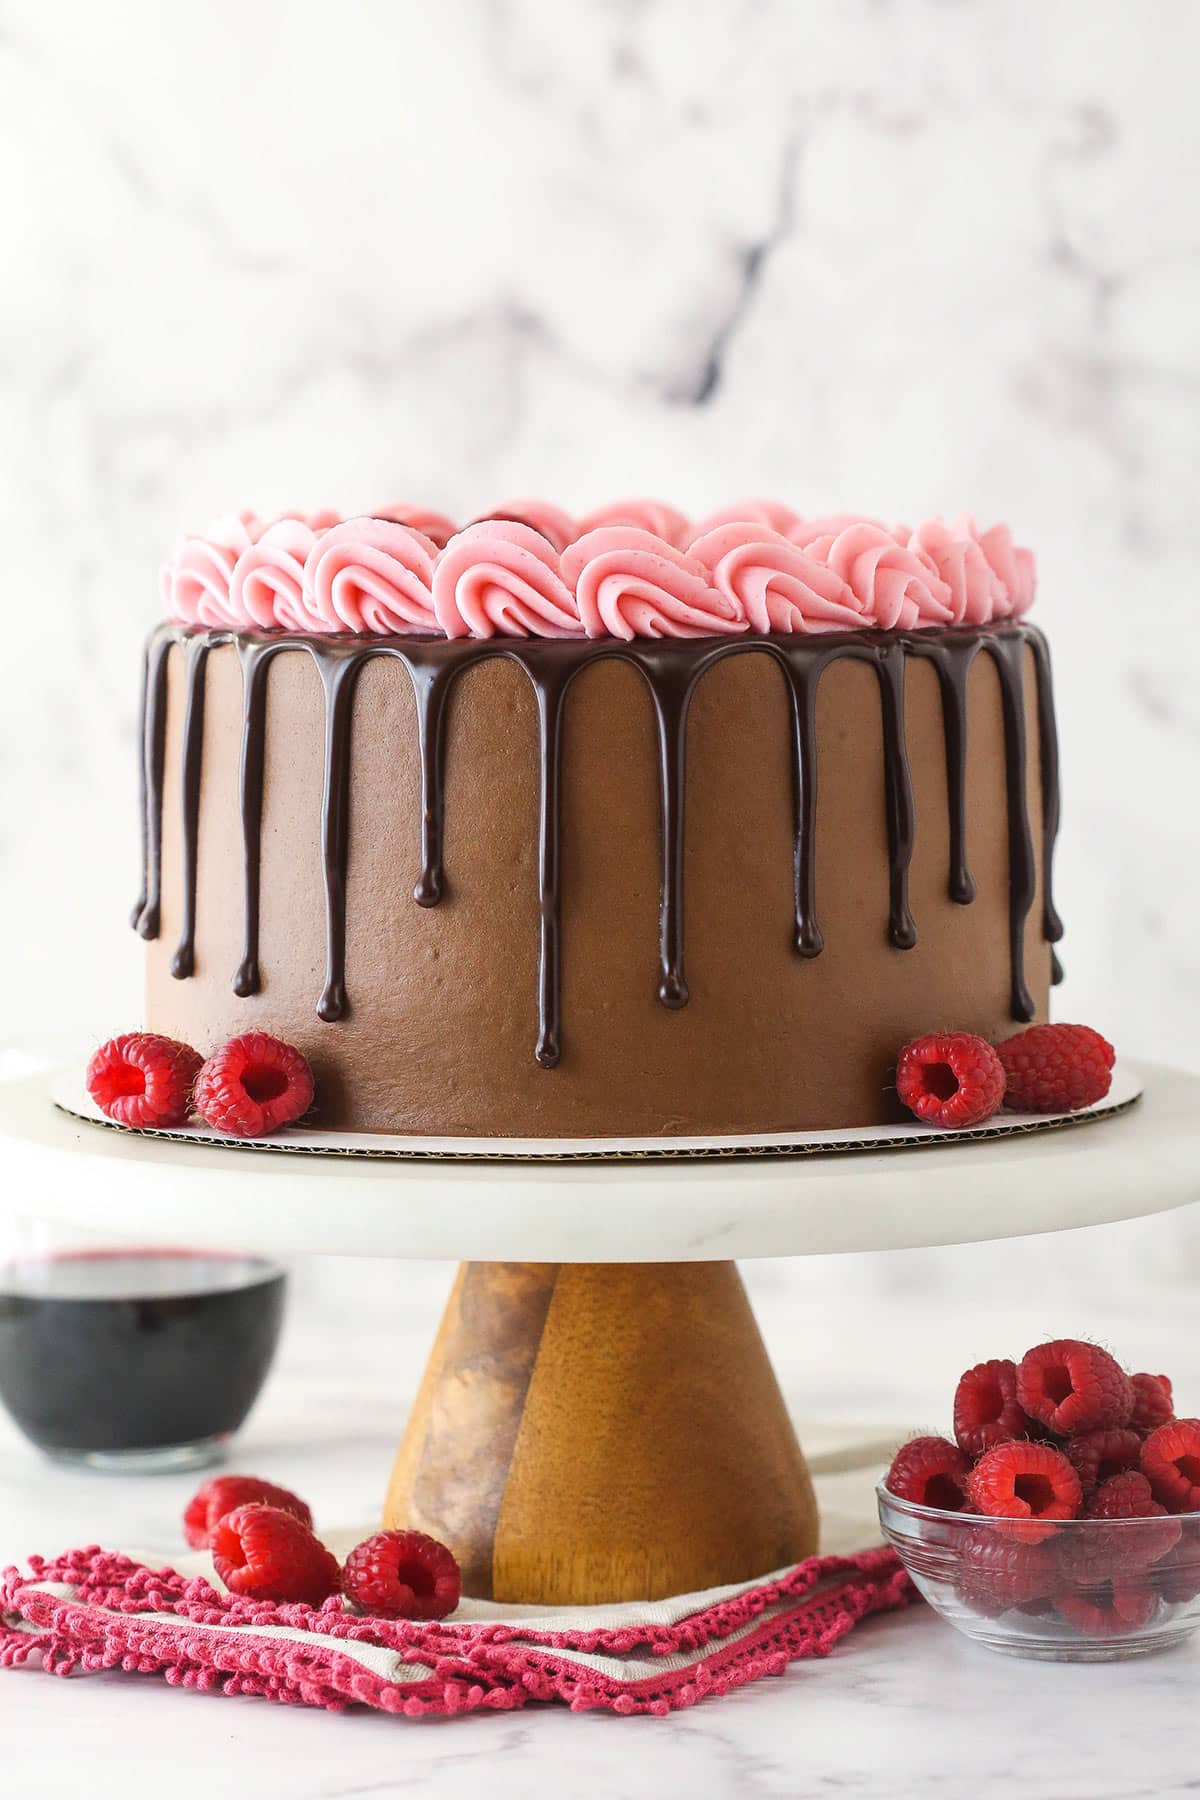 Red wine chocolate cake on a cake stand near a bowl of raspberries.